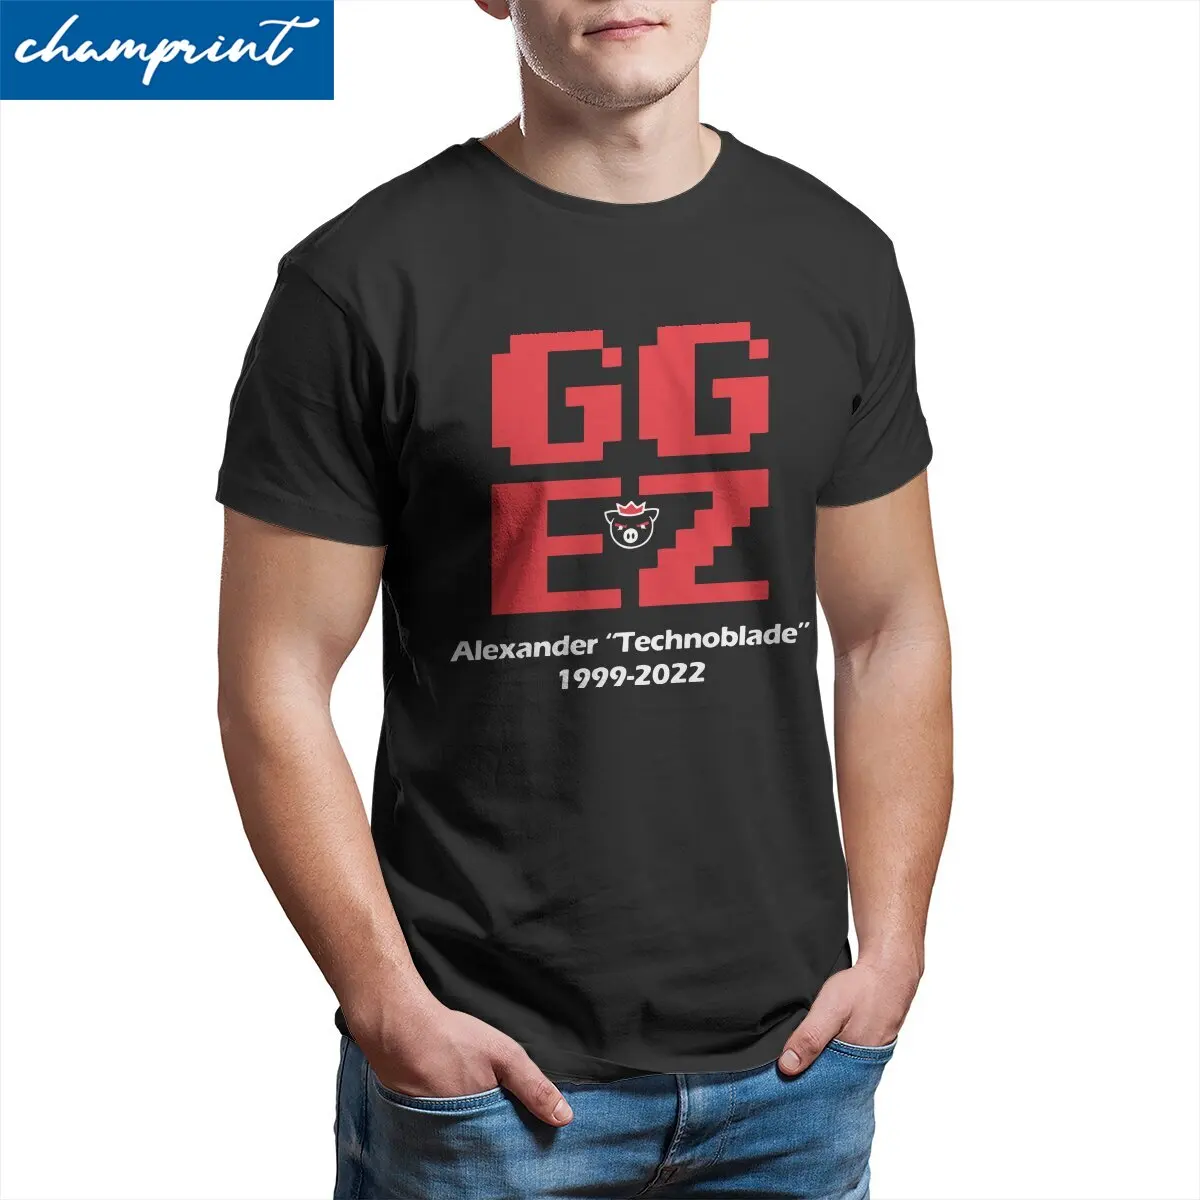 

GG EZ T Shirts for Men Pure Cotton Funny T-Shirts Round Neck Technoblade Never Dies Tees Short Sleeve Tops Party